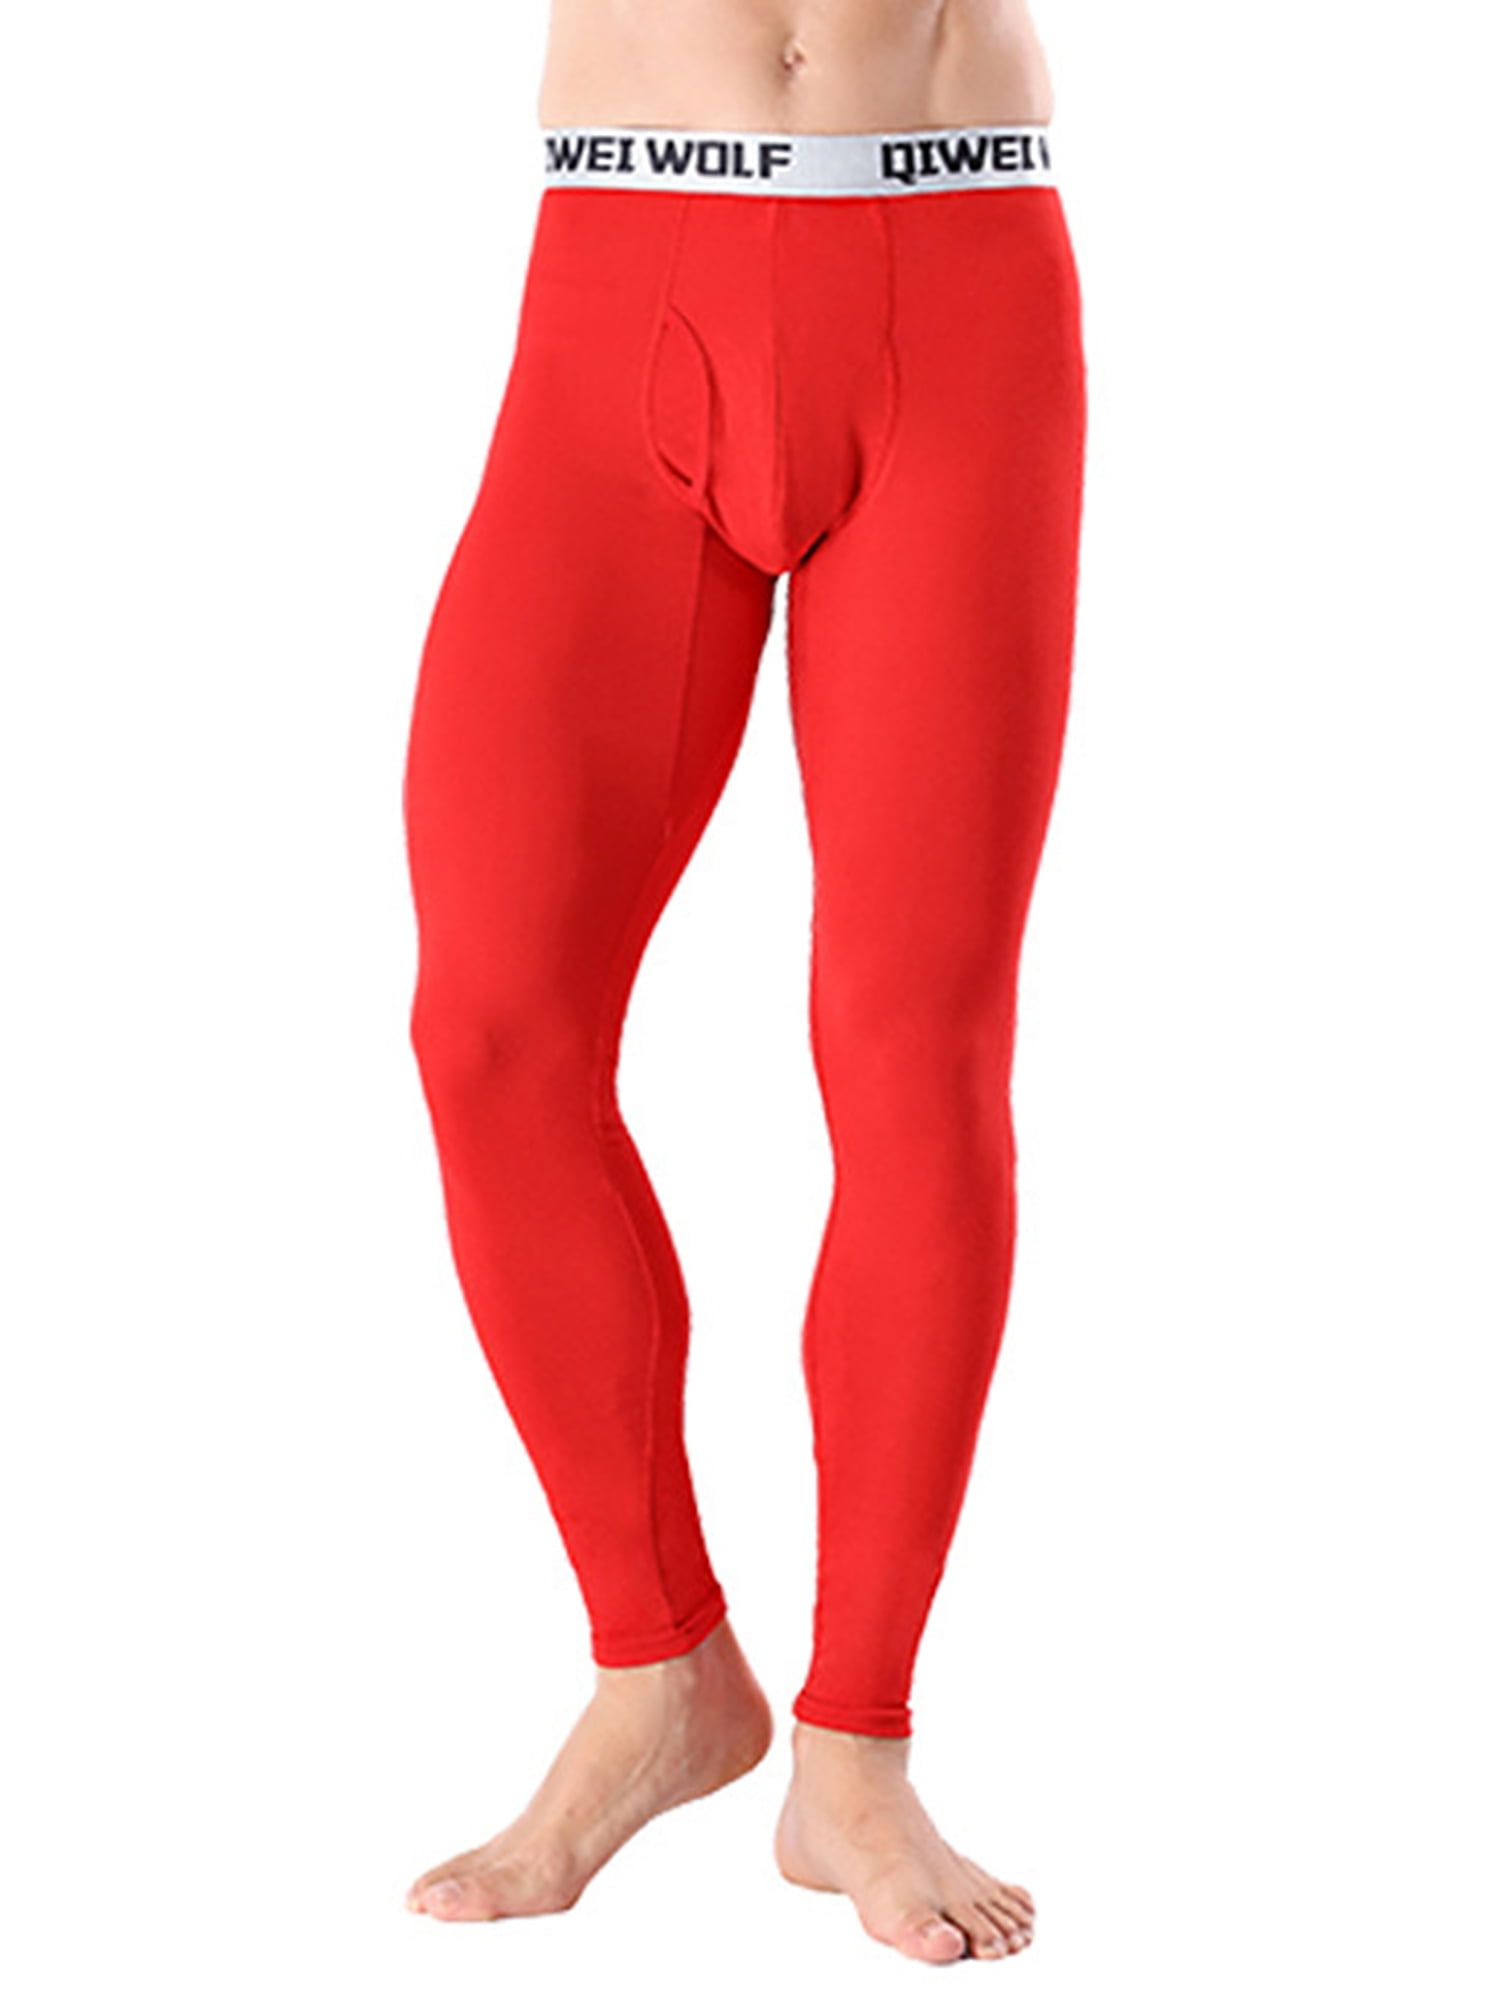 Mens Thermal Warm Heat Control Under Layer Base Layer Winter Tight Top Bottoms 